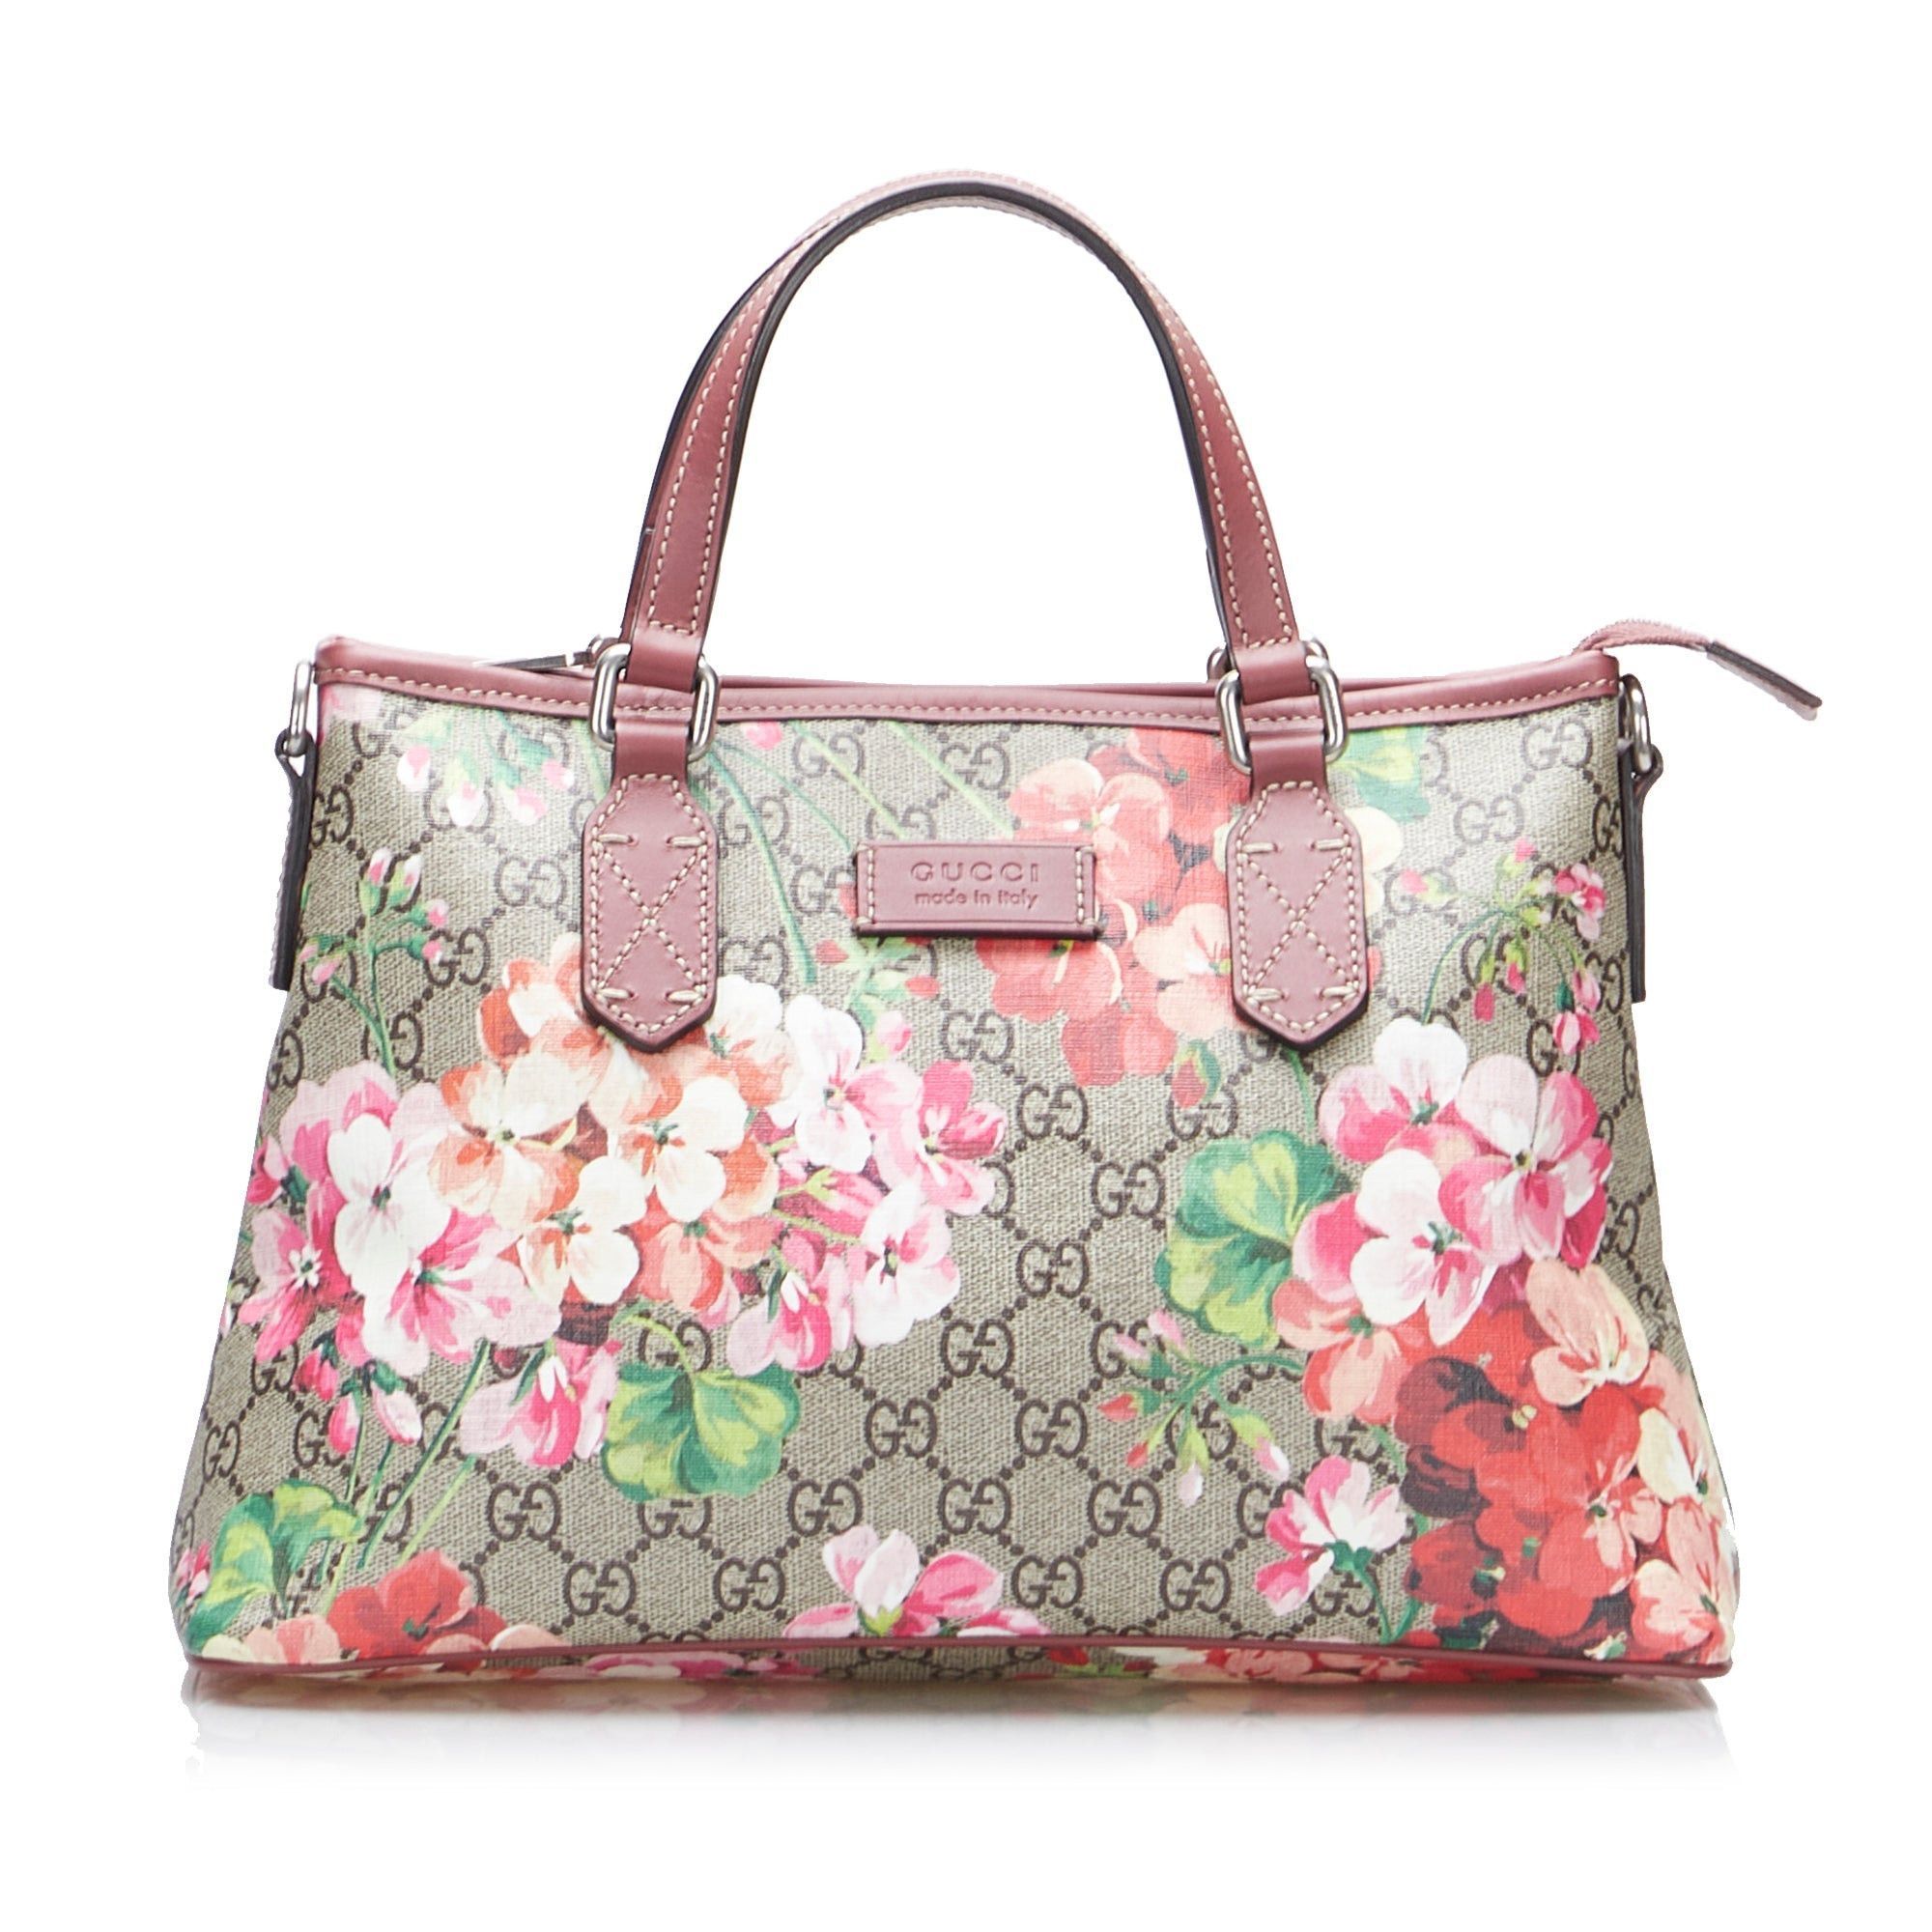 Gucci GUCCI GG Supreme Blooms Satchel Brown | Grailed | Grailed